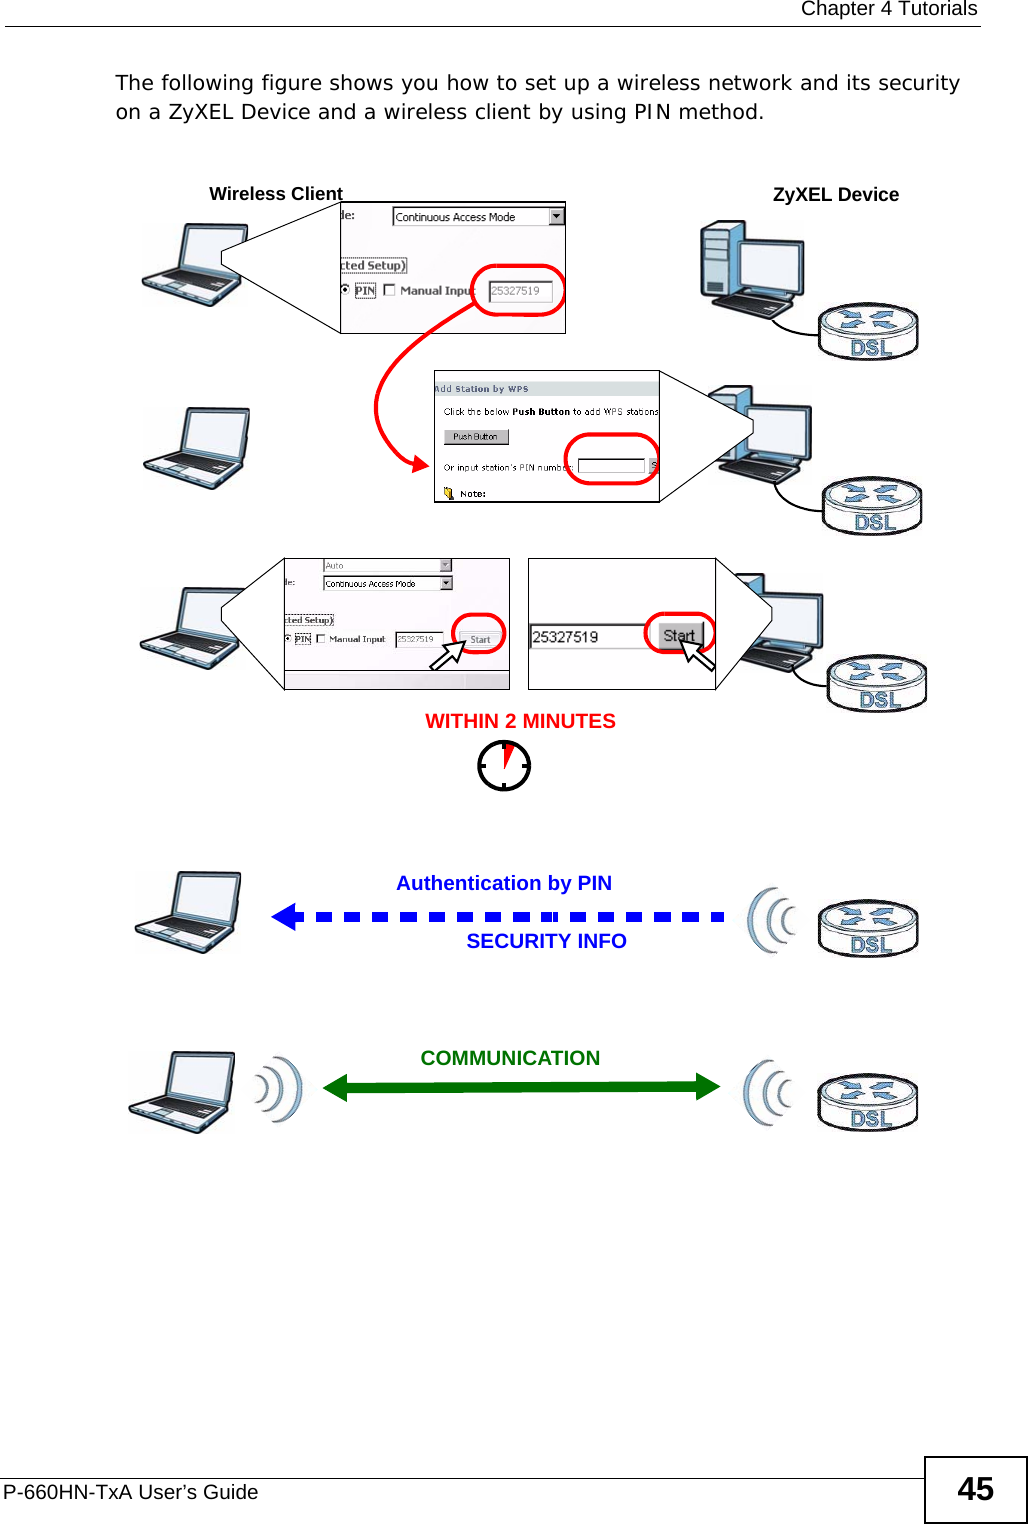  Chapter 4 TutorialsP-660HN-TxA User’s Guide 45The following figure shows you how to set up a wireless network and its security on a ZyXEL Device and a wireless client by using PIN method. Example WPS Process: PIN MethodAuthentication by PINSECURITY INFOWITHIN 2 MINUTESWireless ClientZyXEL DeviceCOMMUNICATION